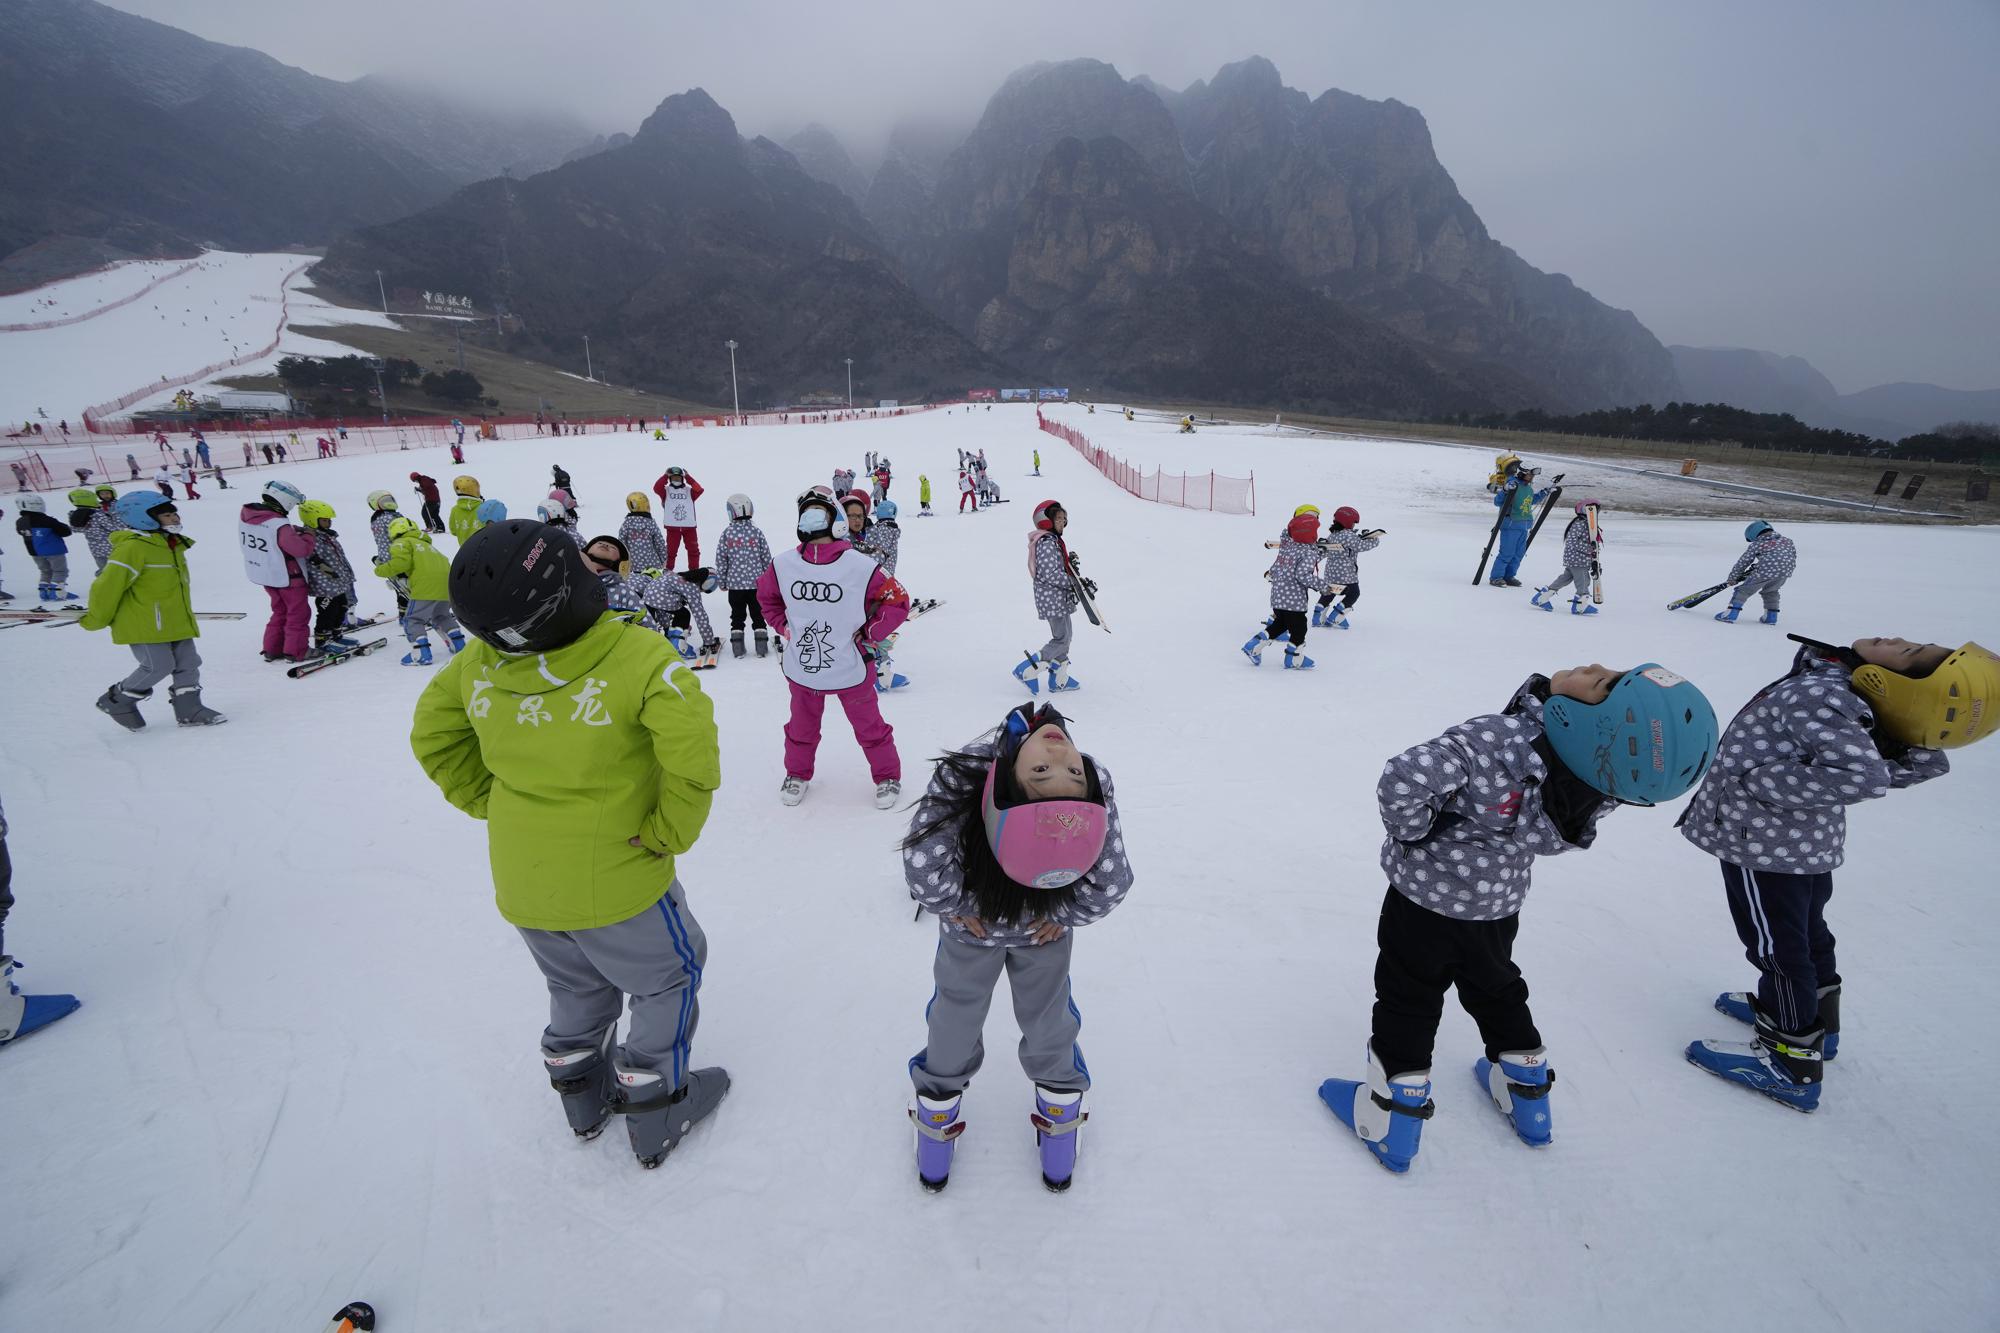 School children warm up before ski lessons at the Vanke Shijinglong Ski Resort in Yanqing on the outskirts of Beijing, China, Thursday, Dec. 23, 2021. The Beijing Winter Olympics is tapping into and encouraging growing interest among Chinese in skiing, skating, hockey and other previously unfamiliar winter sports. It's also creating new business opportunities. (AP Photo/Ng Han Guan)